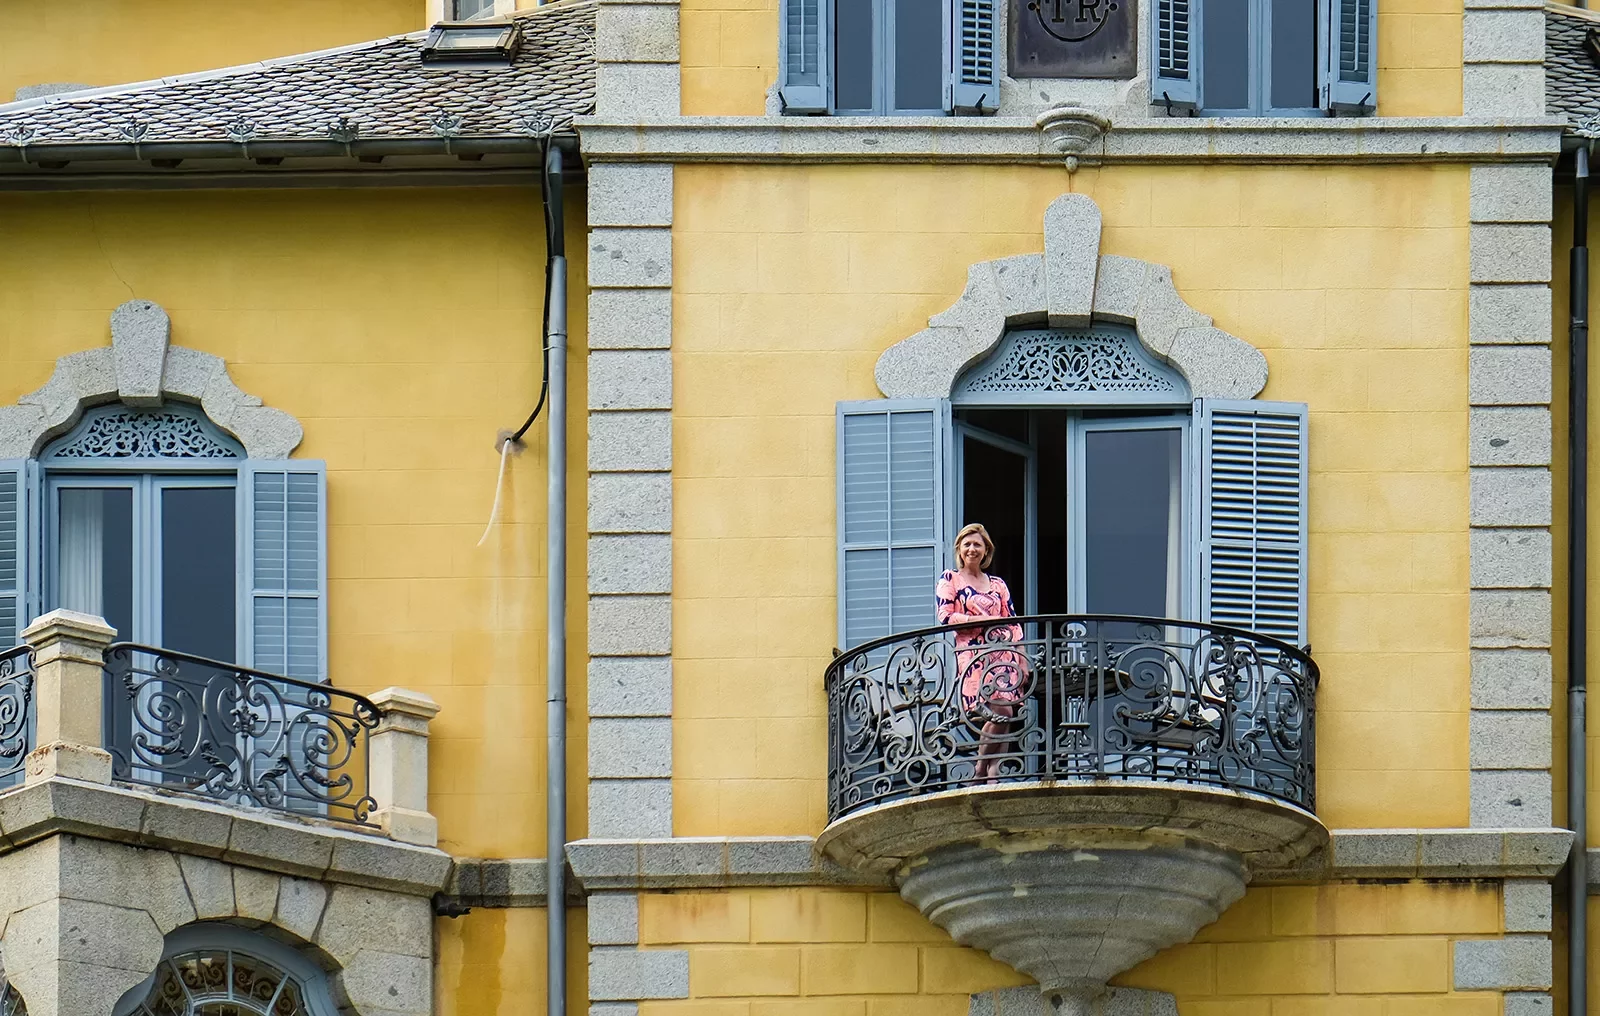 Woman standing on balcony of yellow building.